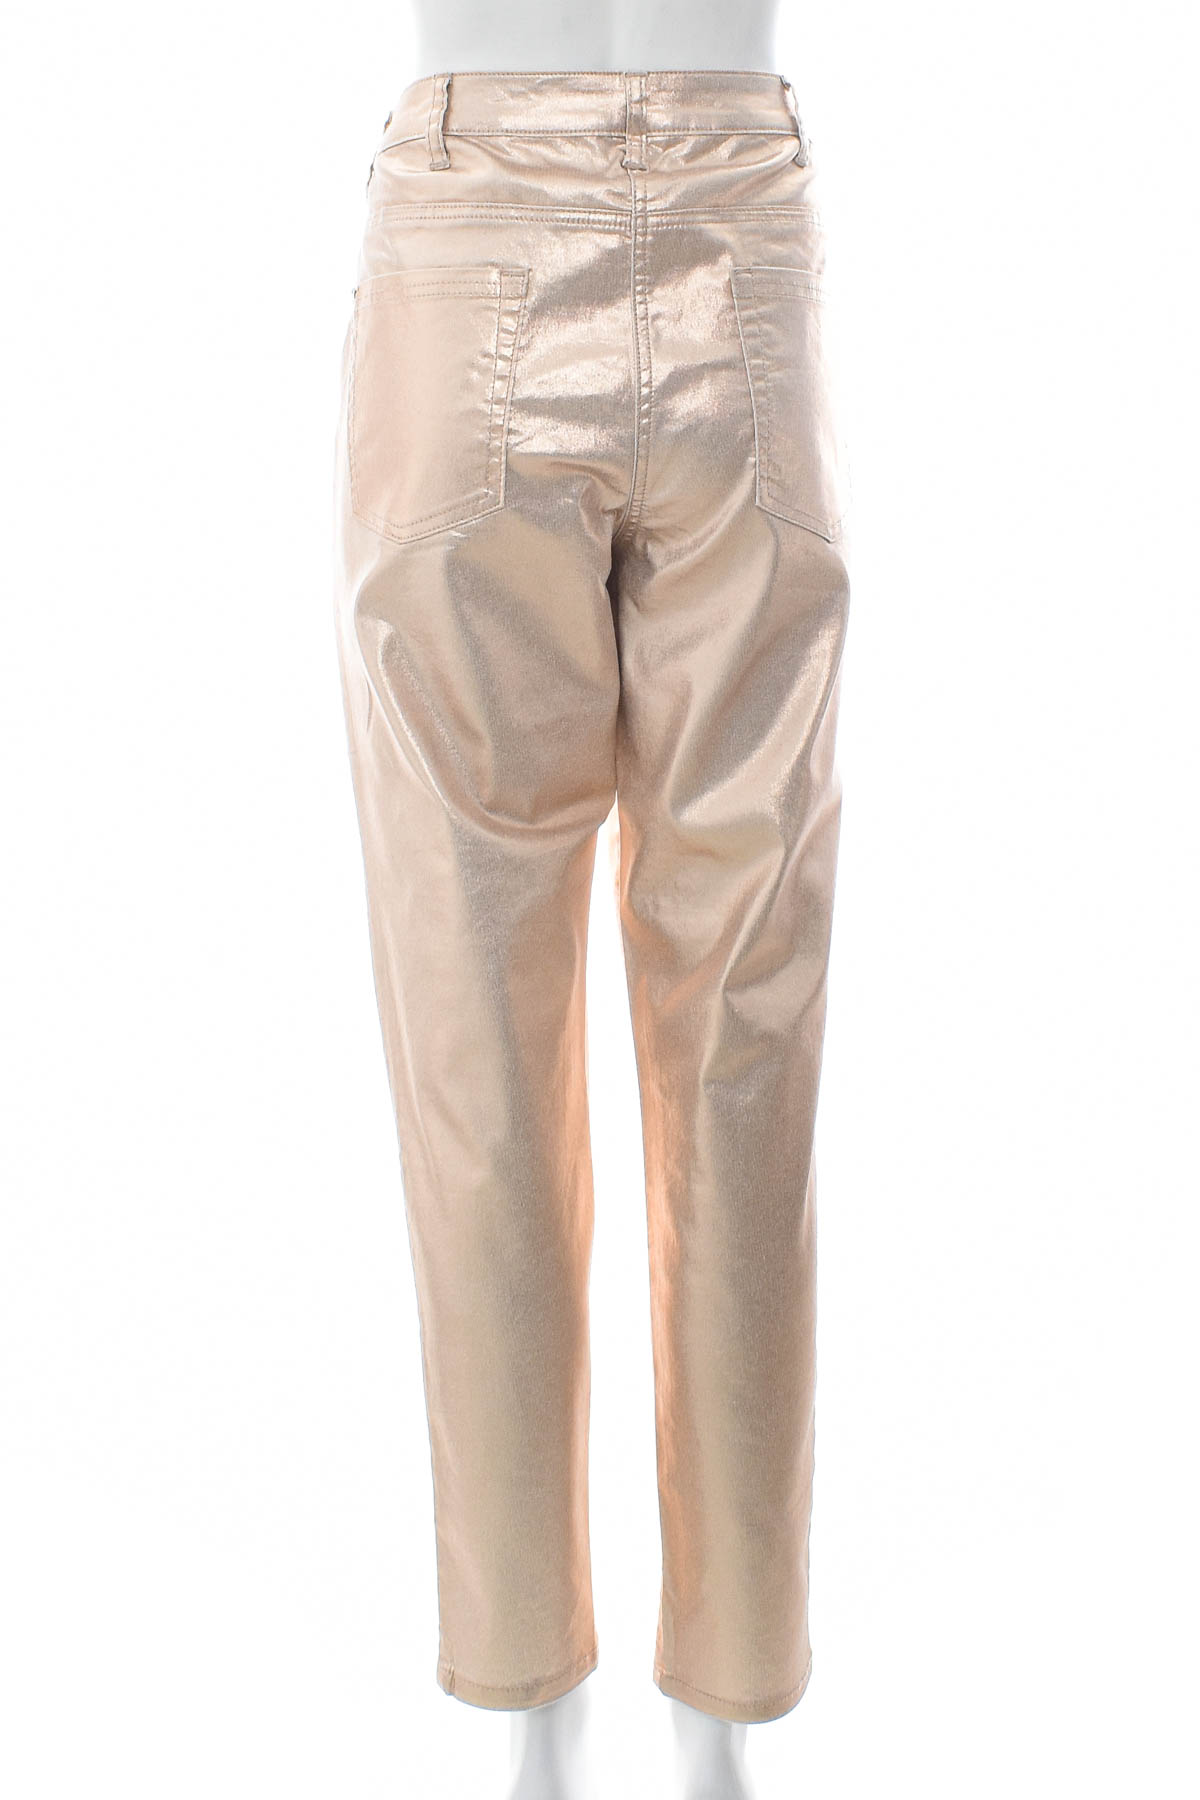 Women's trousers - Amy Vermont - 1